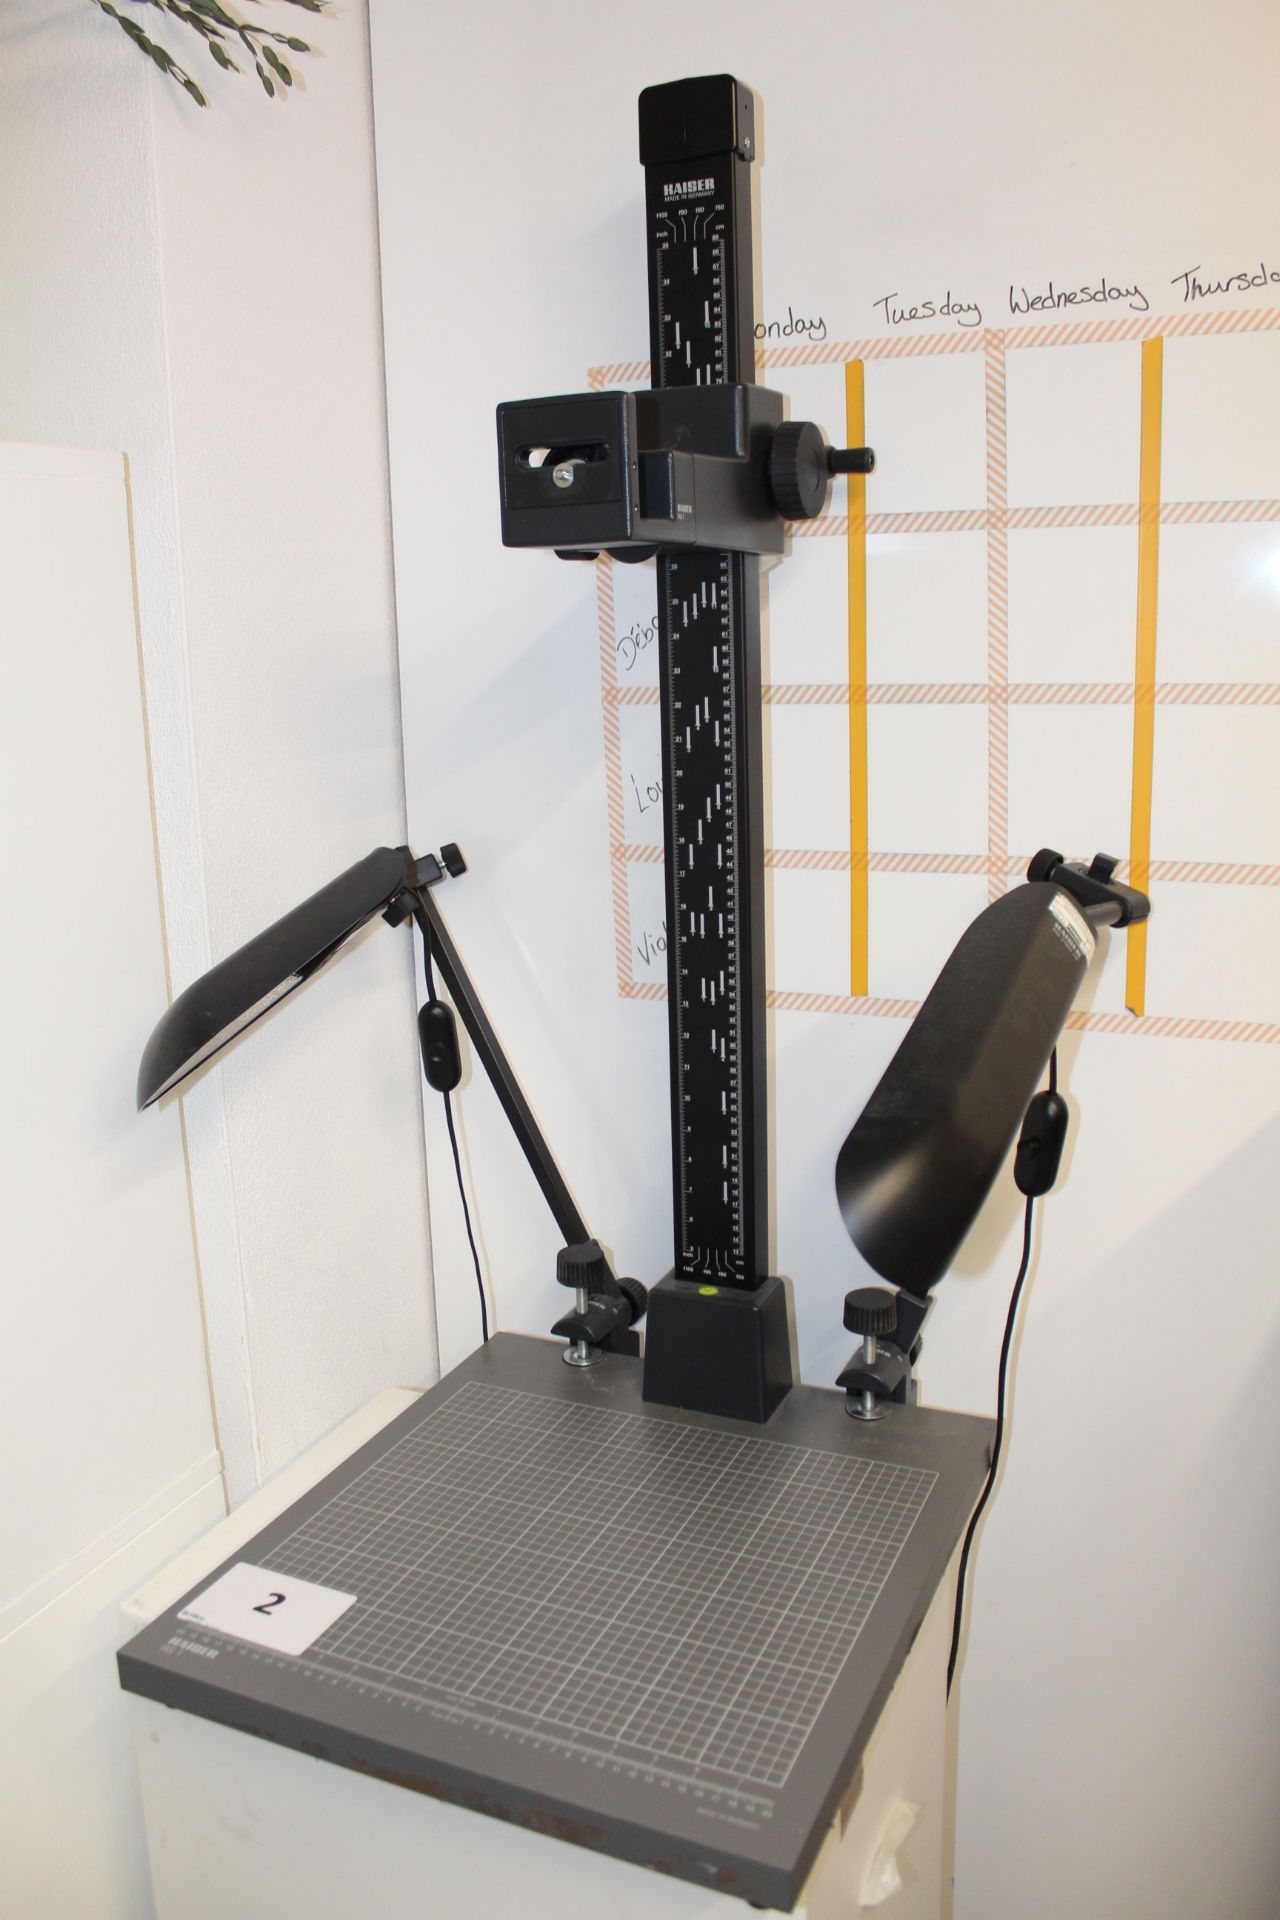 Kaiser RS 1 Copy stand with RA 1 camera arm and 2 Kaiser RB 218 N lighting units